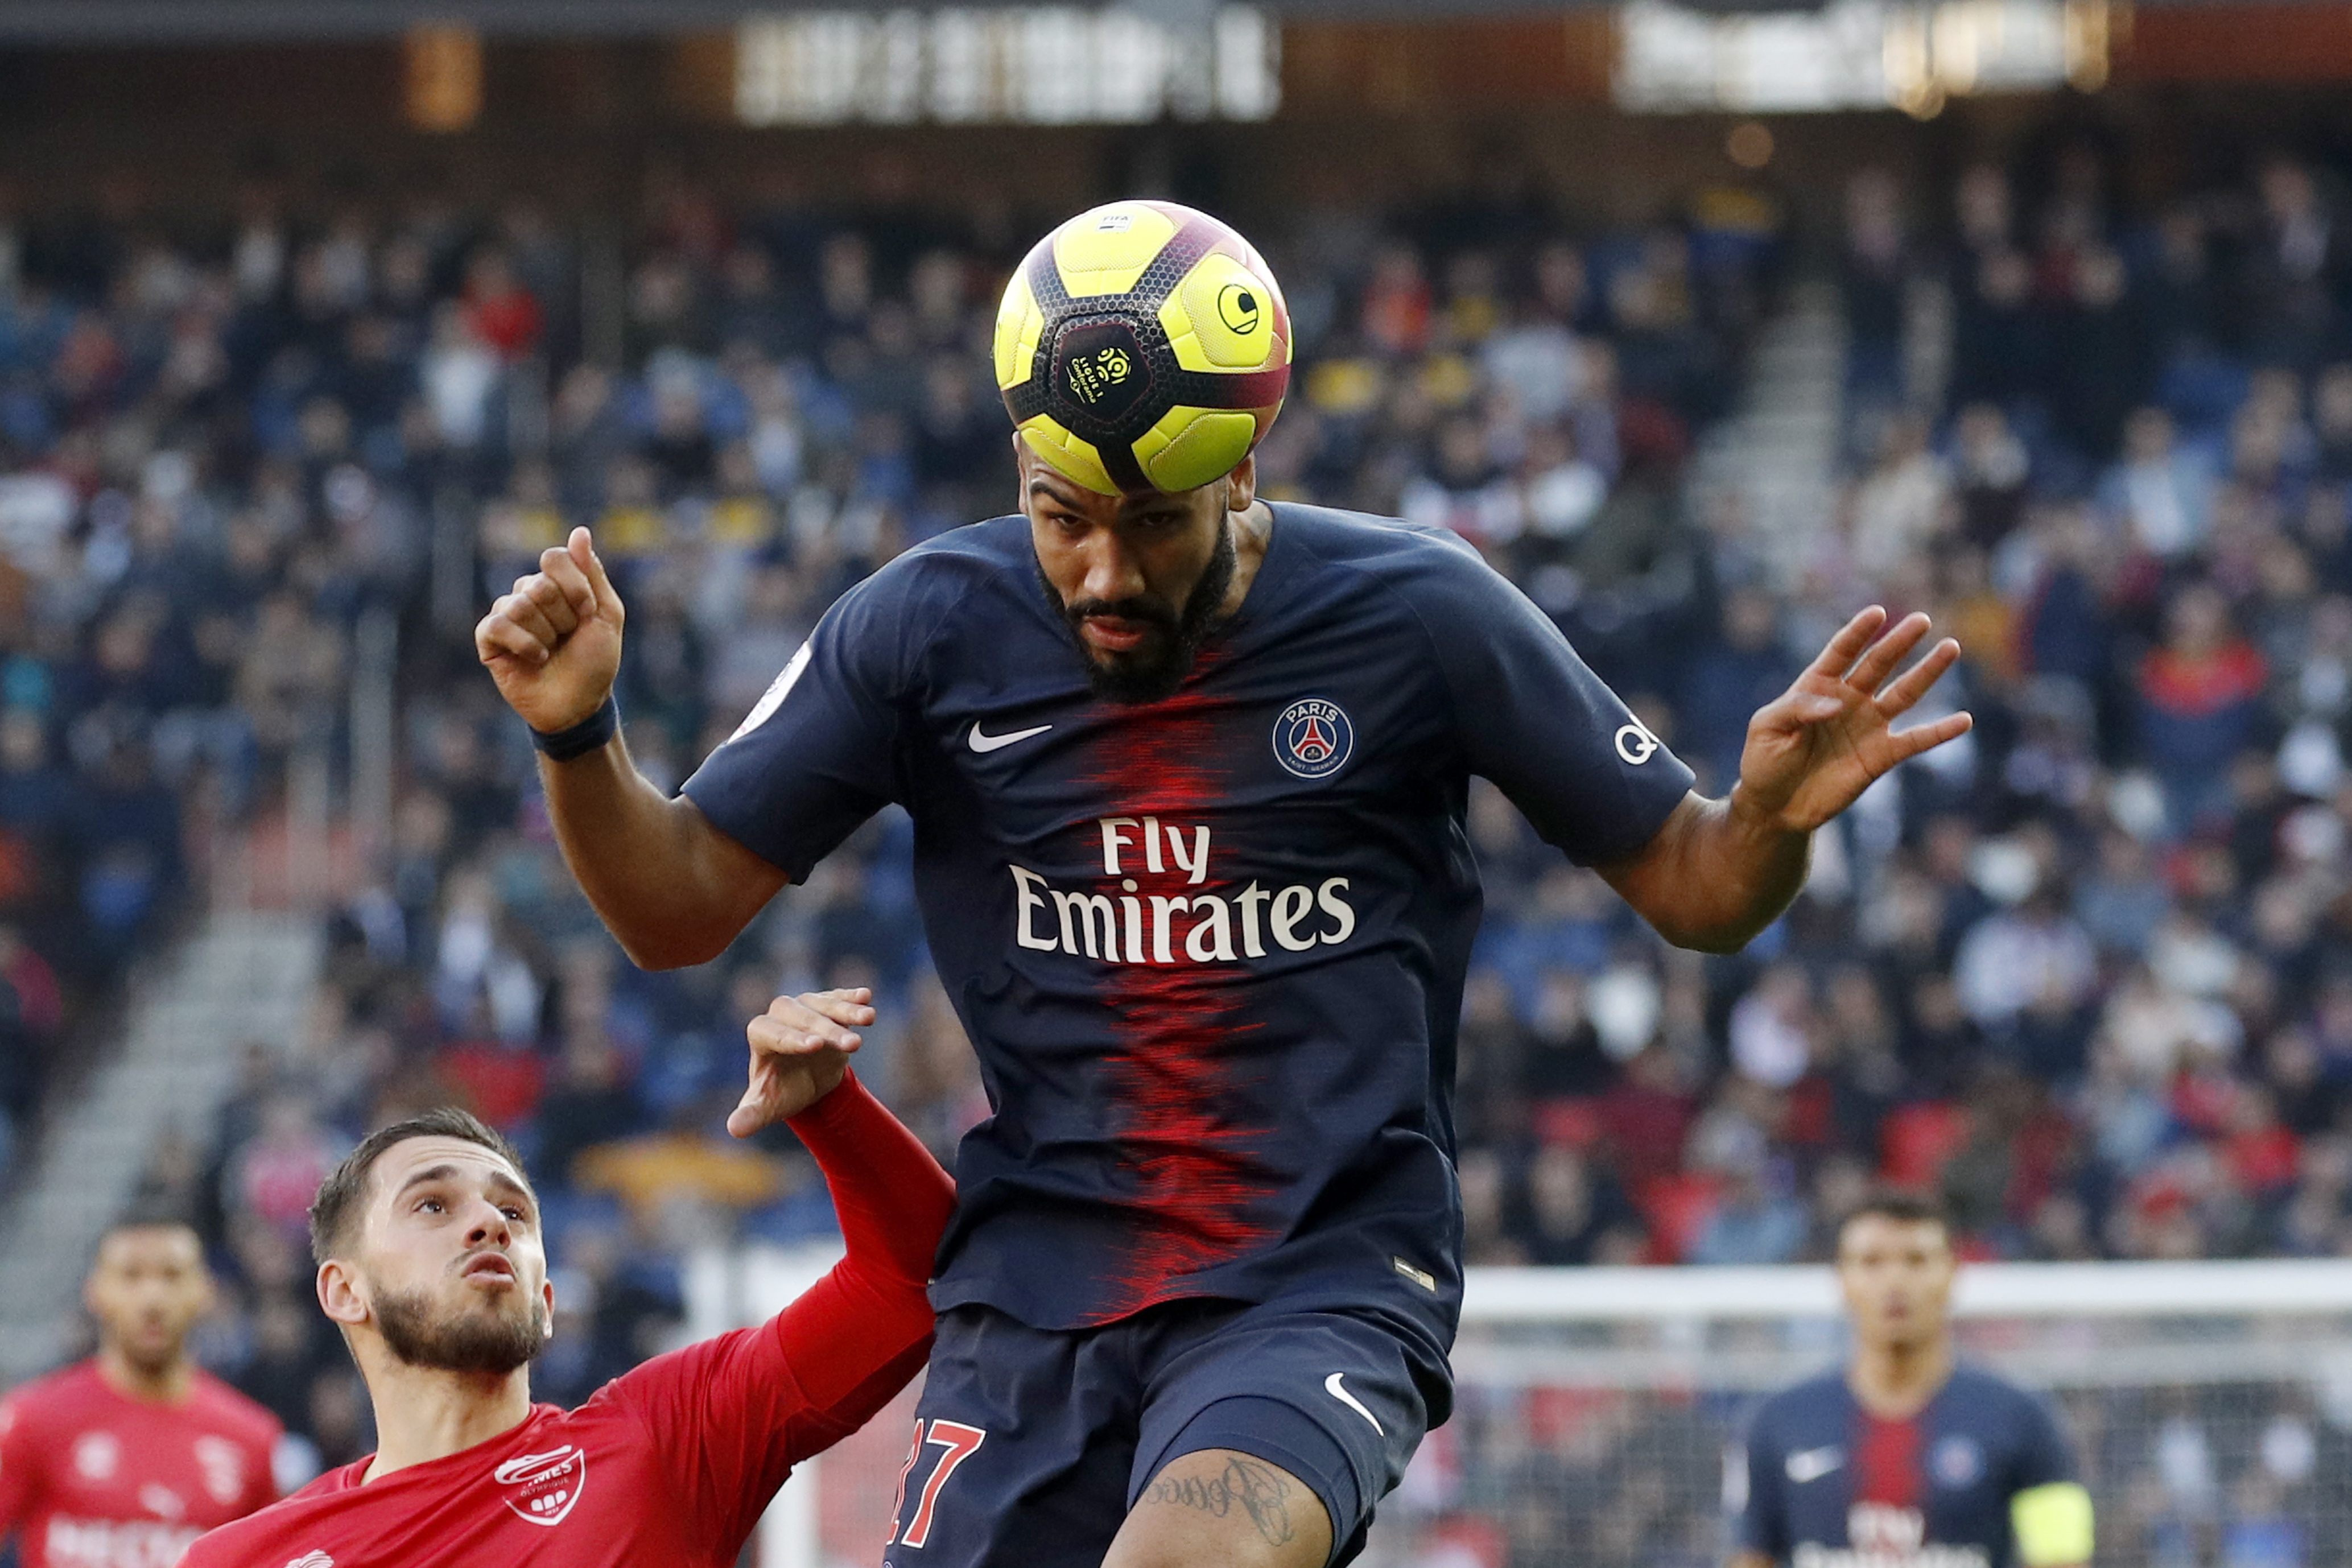 epa07390788 Paris Saint Germain's Eric Maxim Choupo-Moting (C) and Pierrick Valdivia of Nimes (L) in action during the French Ligue 1 soccer match between PSG and Nimes at the Parc des Princes stadium in Paris, France, 23 February 2019.  EPA/YOAN VALAT